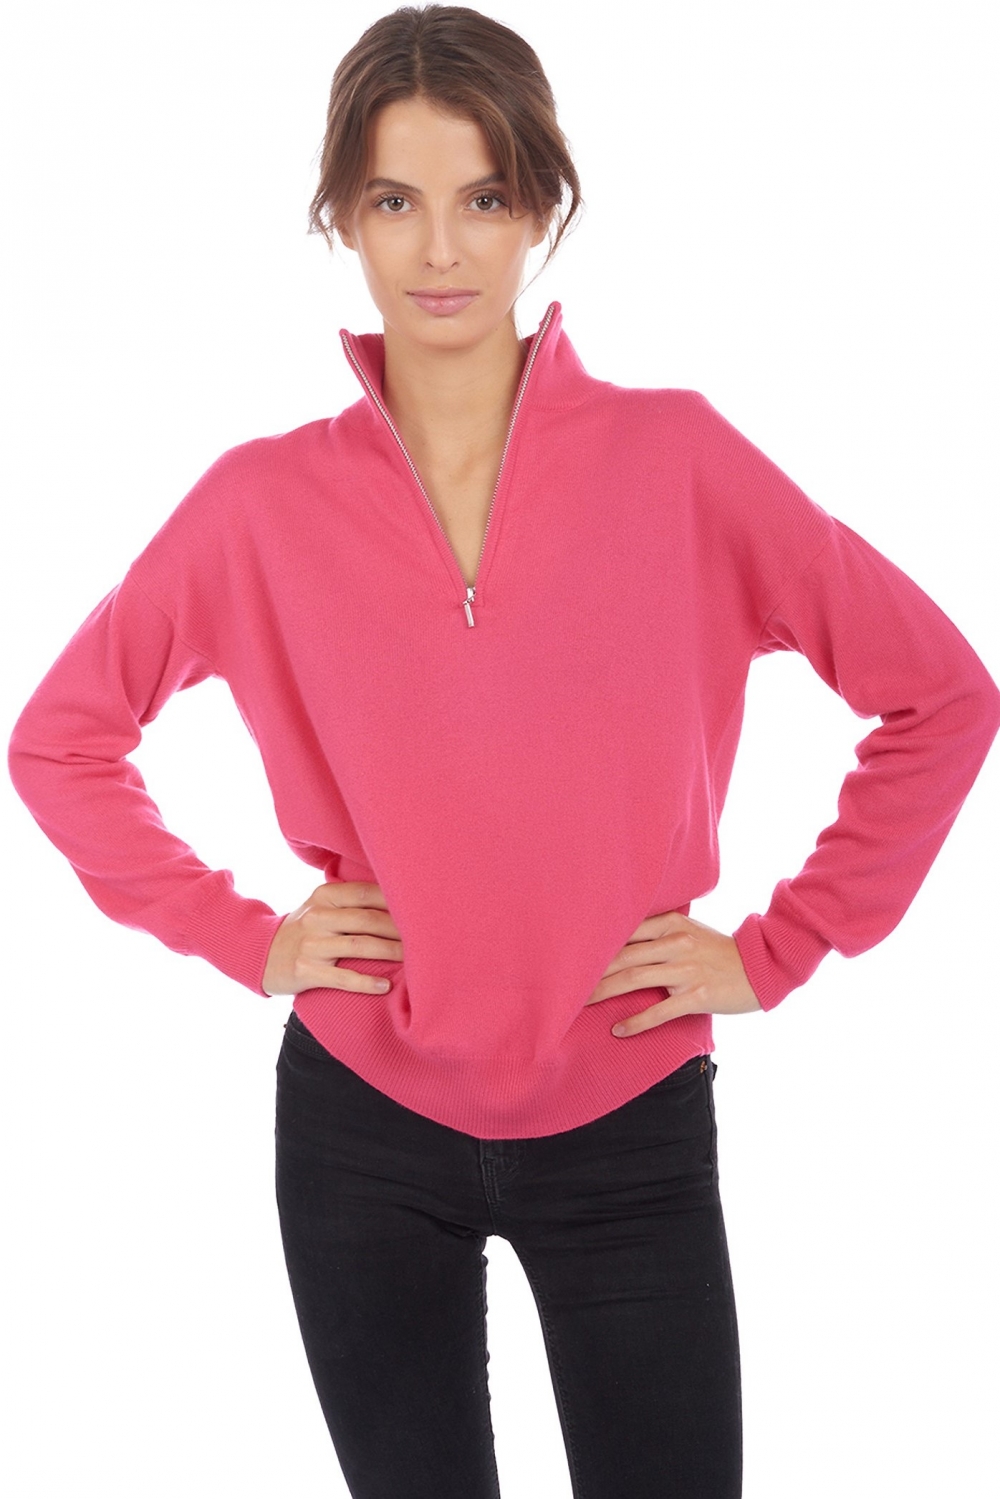 Cachemire pull femme col roule groseille rose shocking xs